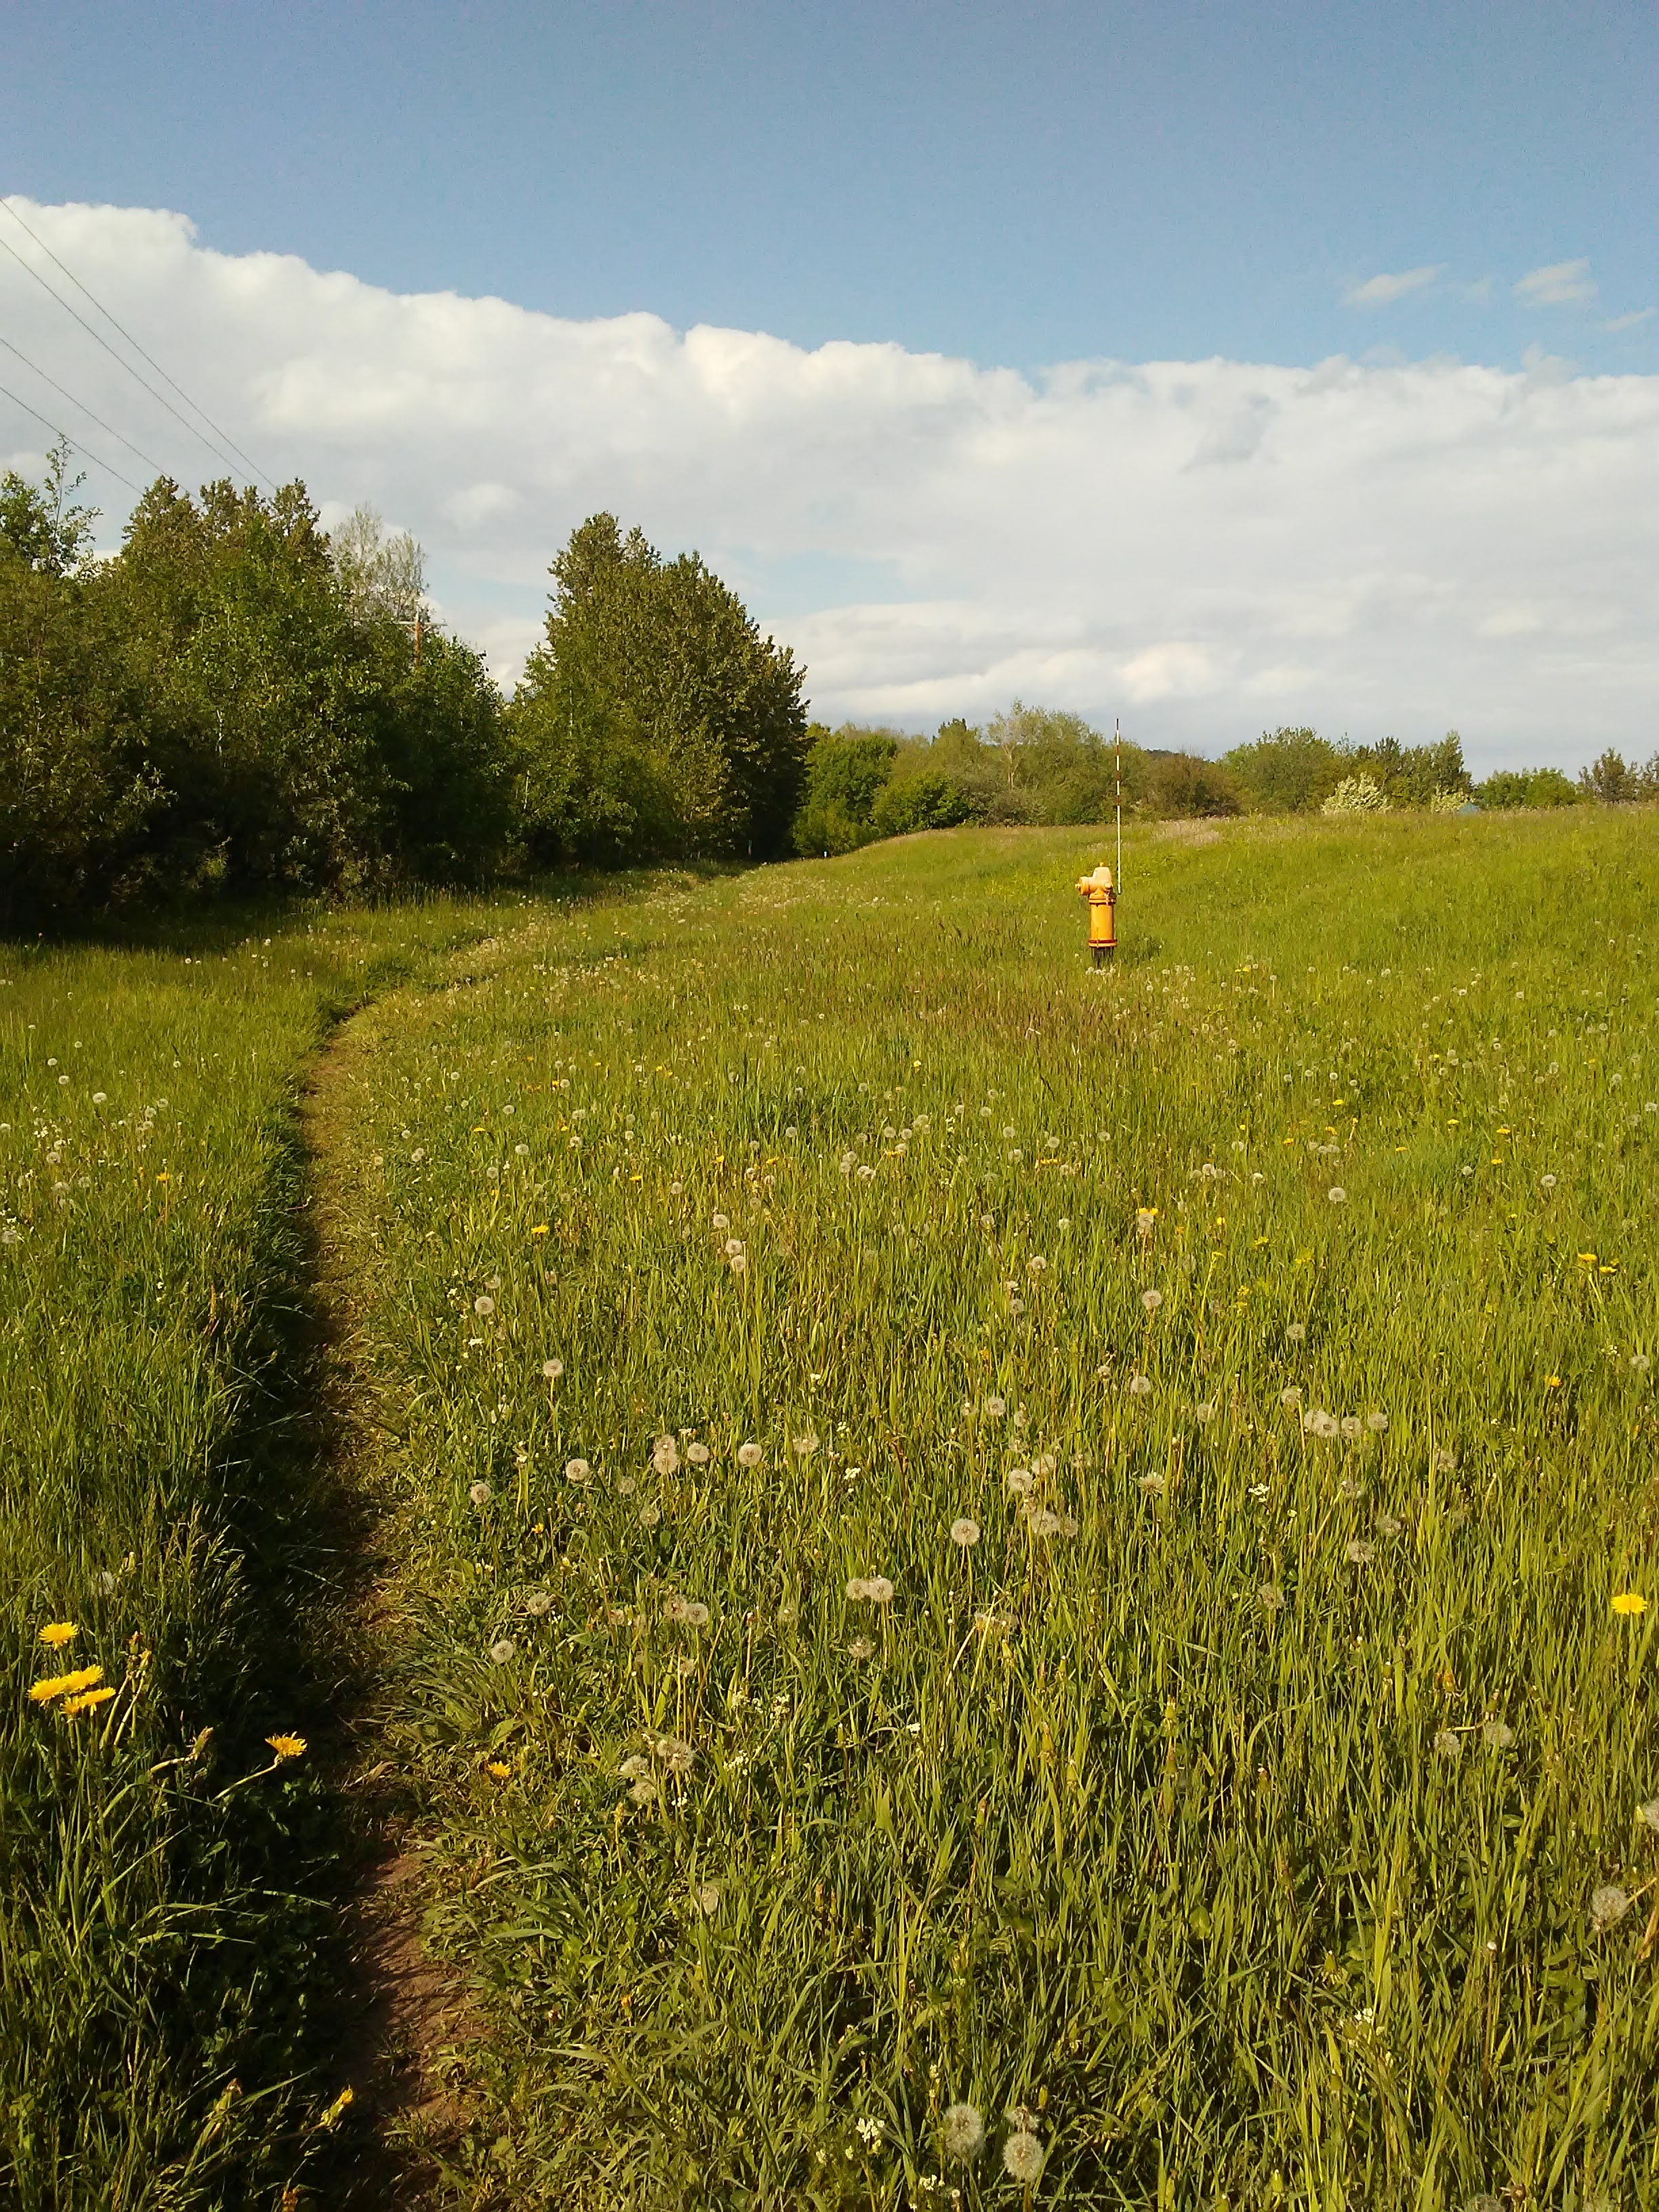 dirt path through long grass and a yellow fire hydrant